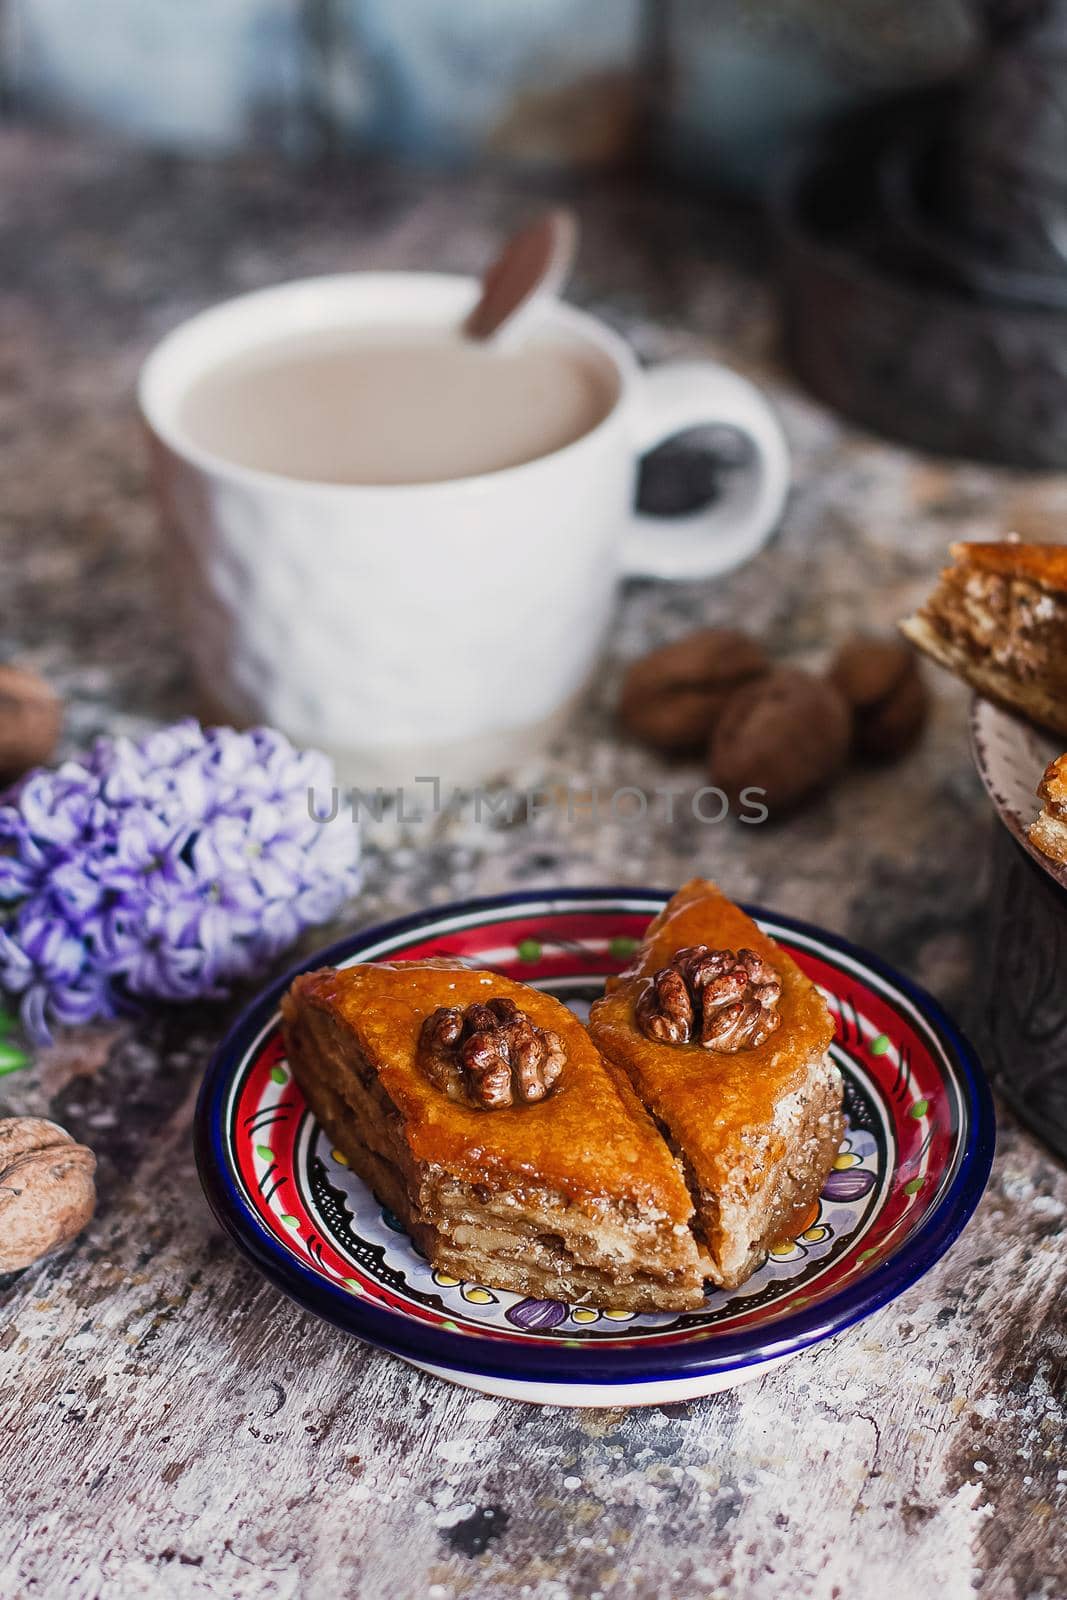 Assorted baklava. A Turkish ramadan arabic sweet dessert on a decorative plate, with coffee cup in the background. Middle eastern food baklava with nuts and honey syrup.